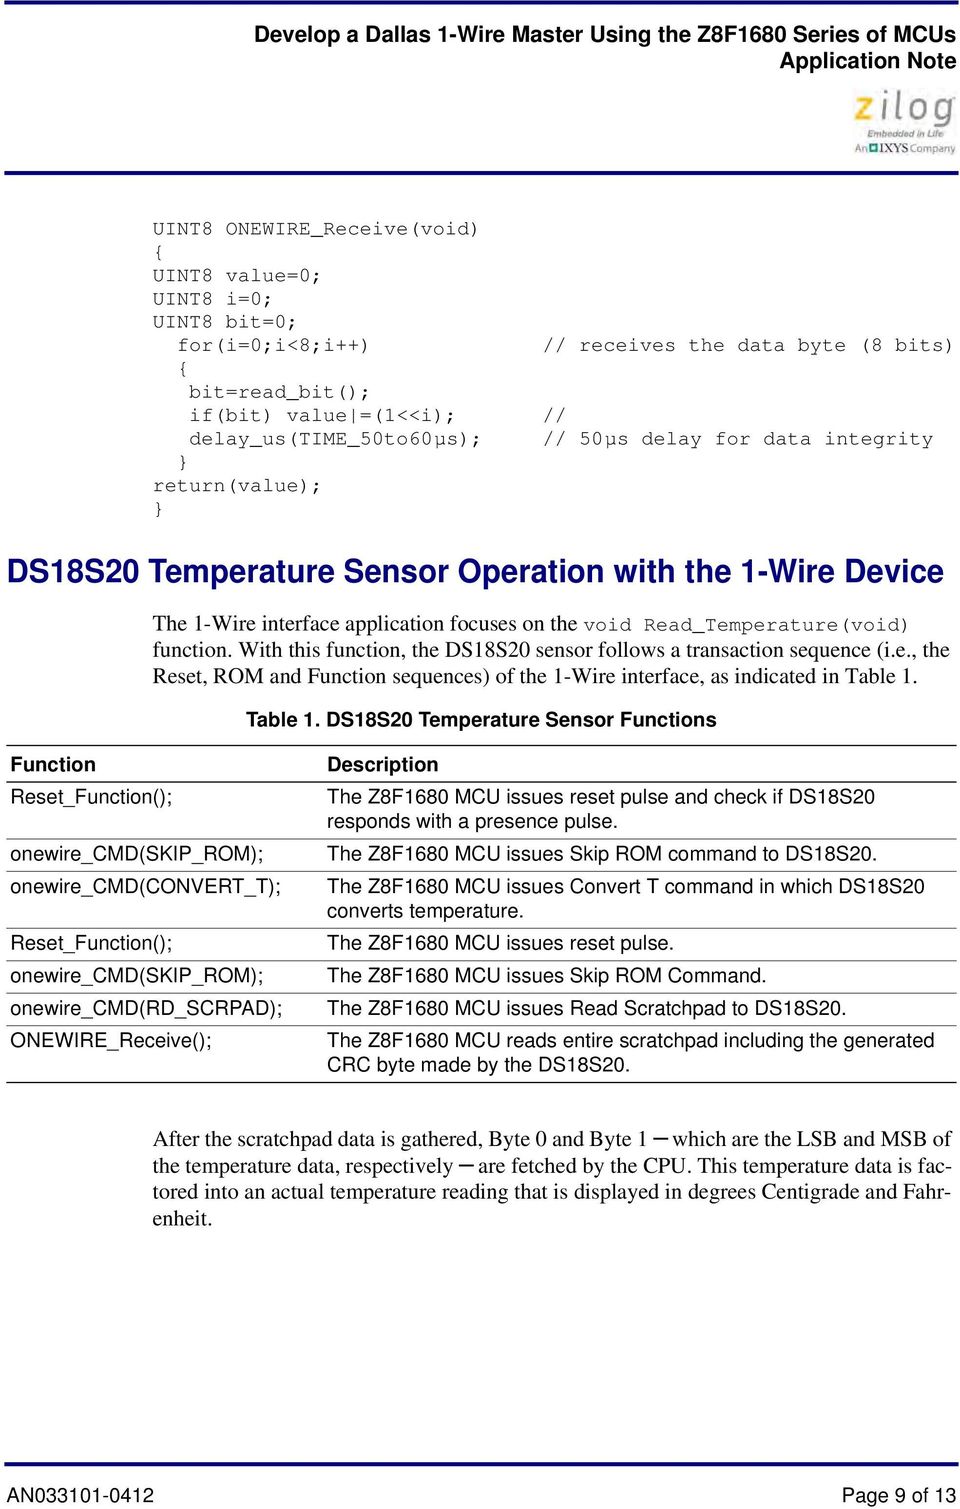 With this function, the DS18S20 sensor follows a transaction sequence (i.e., the Reset, ROM and Function sequences) of the 1-Wire interface, as indicated in Table 1.